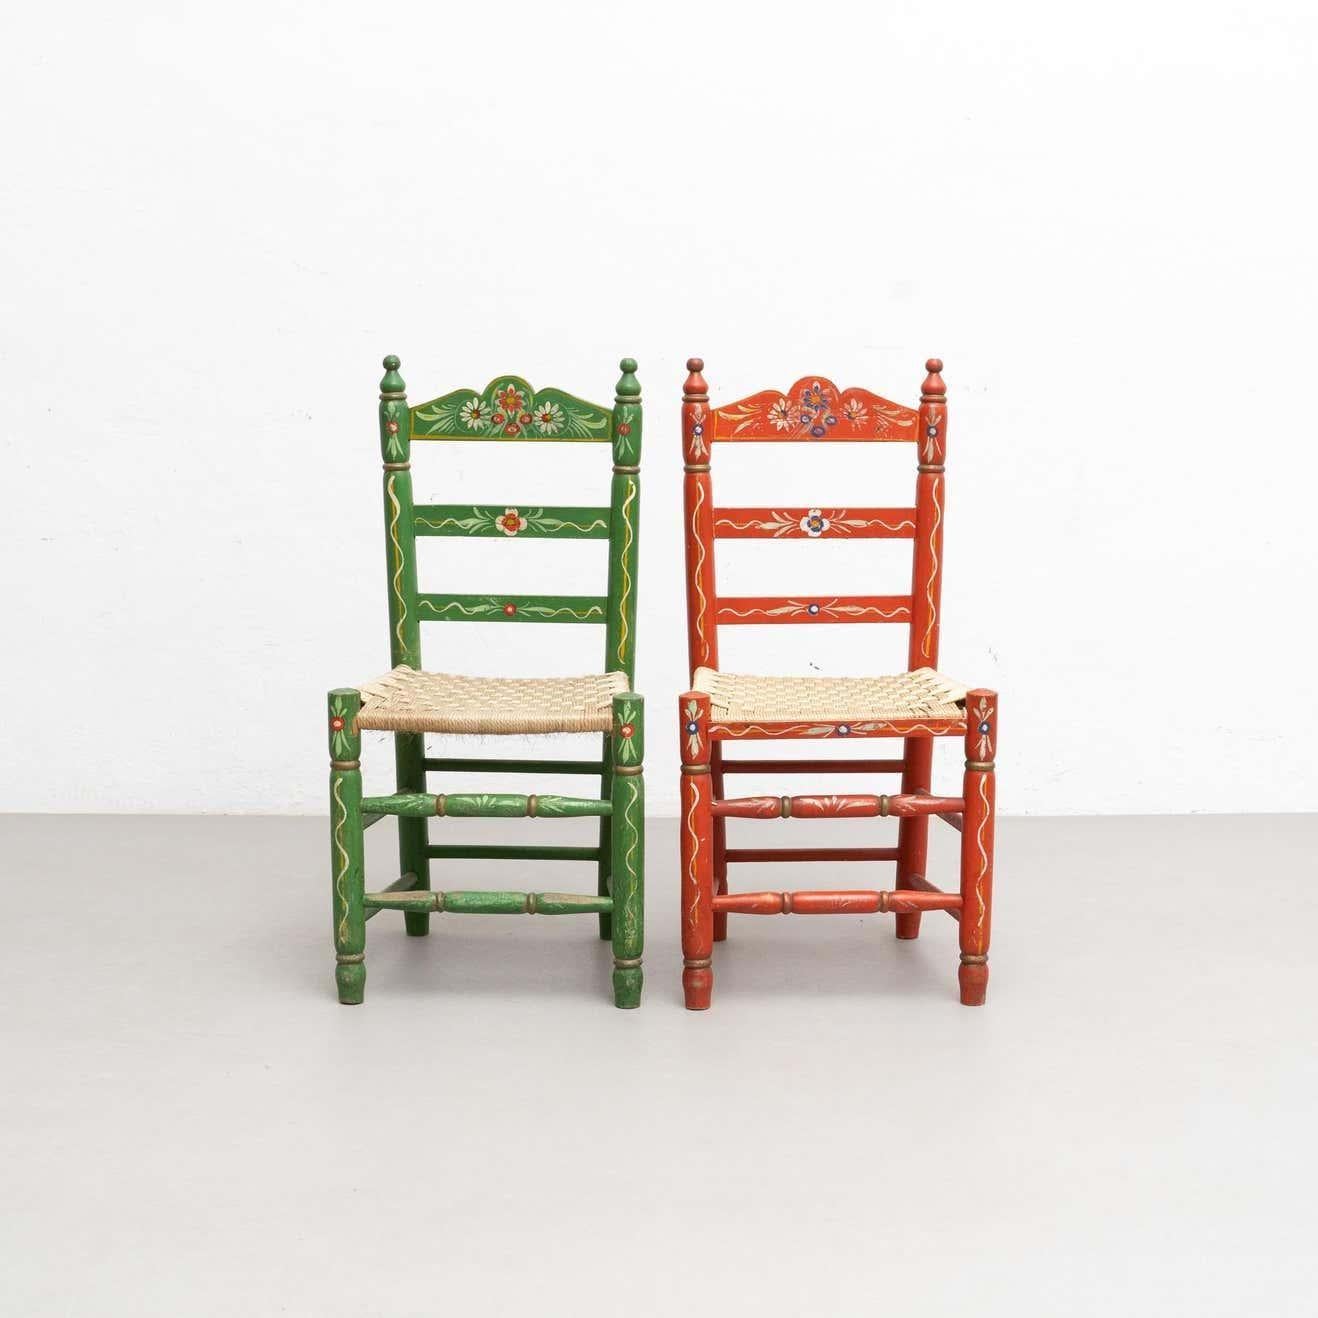 Set of Two Rustic Traditional Hand Painted Wood Chairs, circa 1940 In Good Condition For Sale In Barcelona, Barcelona